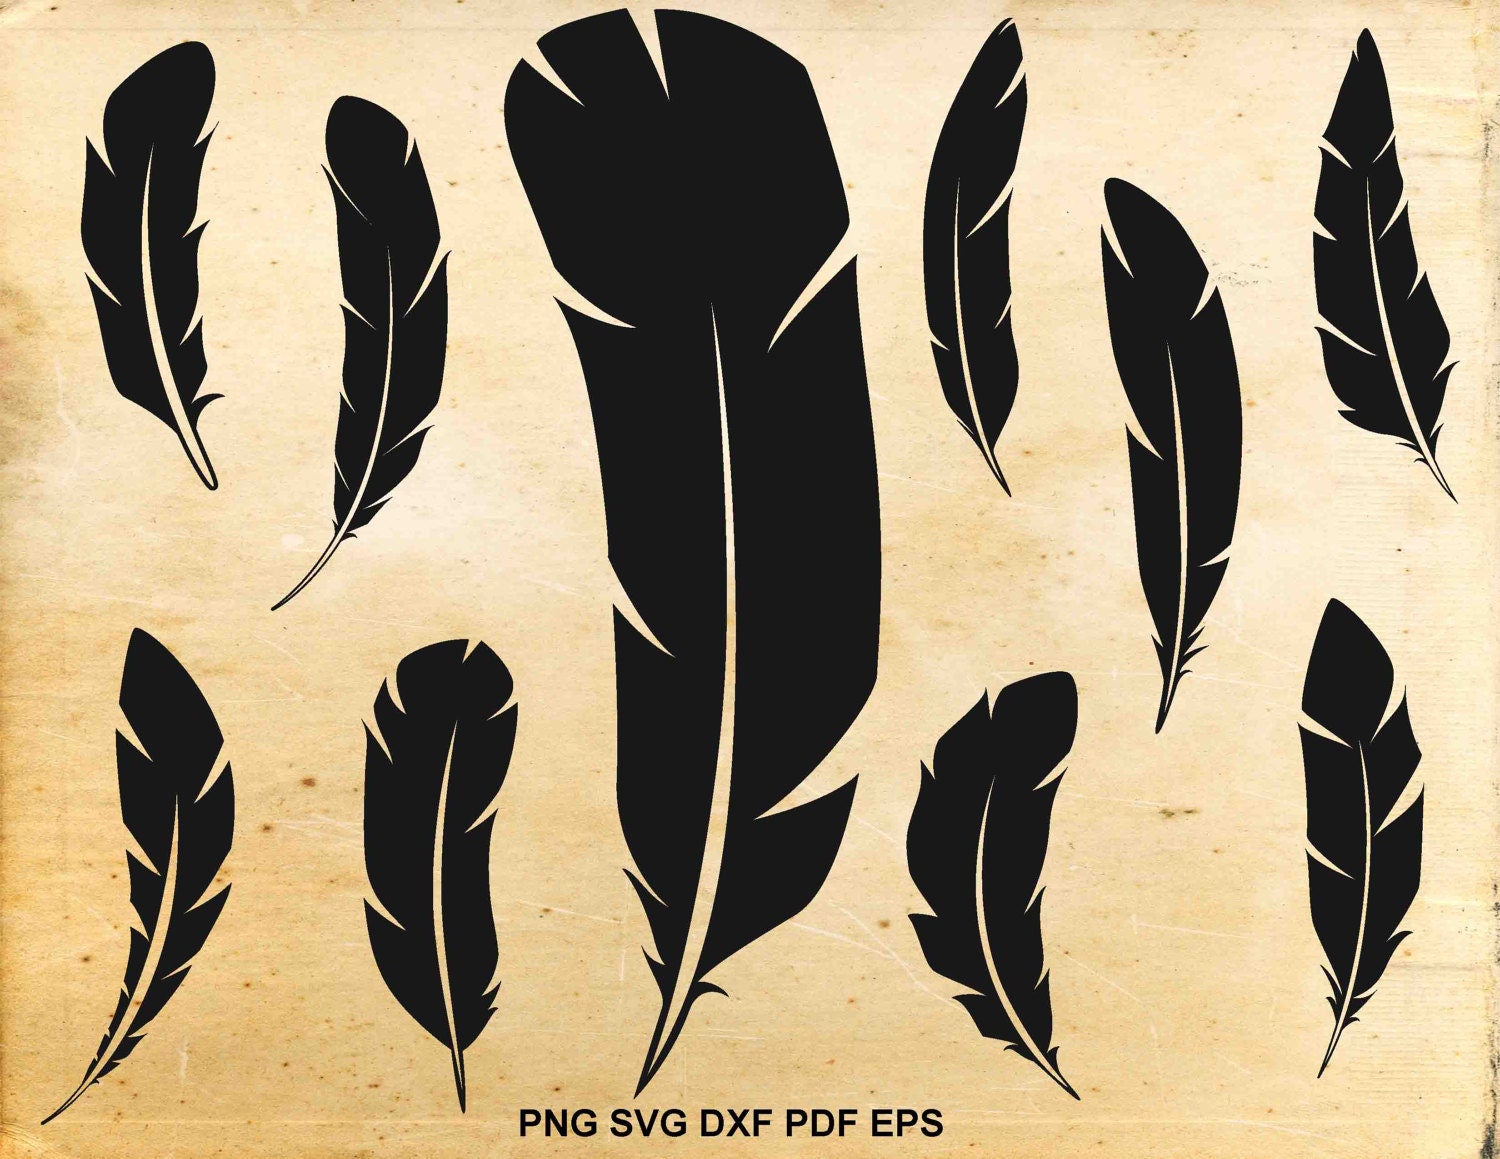 Feather svg, Feathers silhouette, Feather clipart, Boho ...